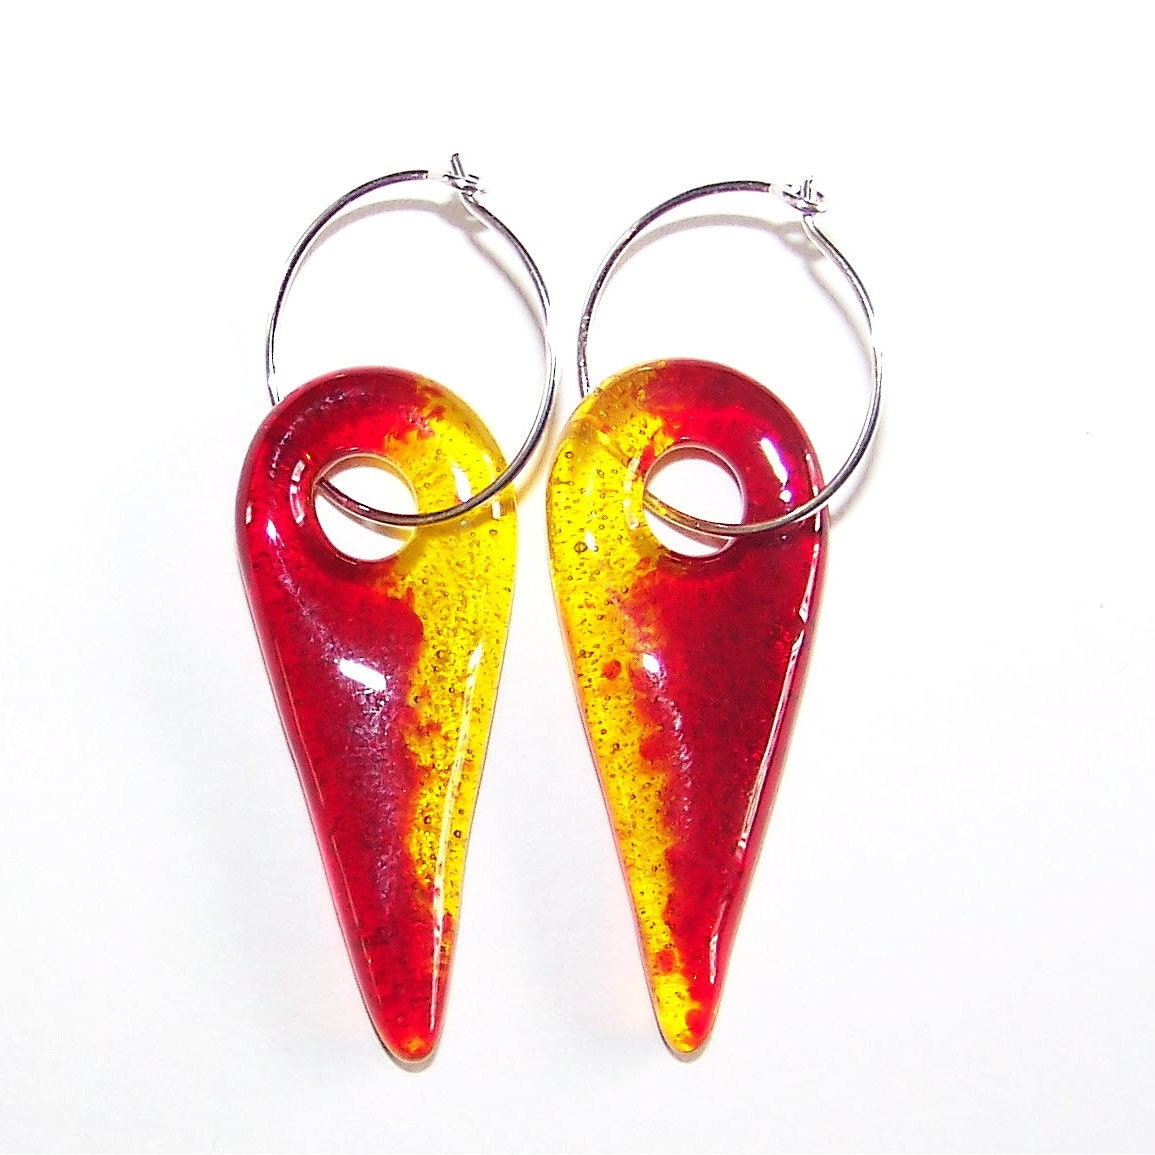 Fused Glass, Red and Yellow Duet Spike Earrings on Sterling Silver Hoops, jewelry by colorolight on Etsy - colorolight